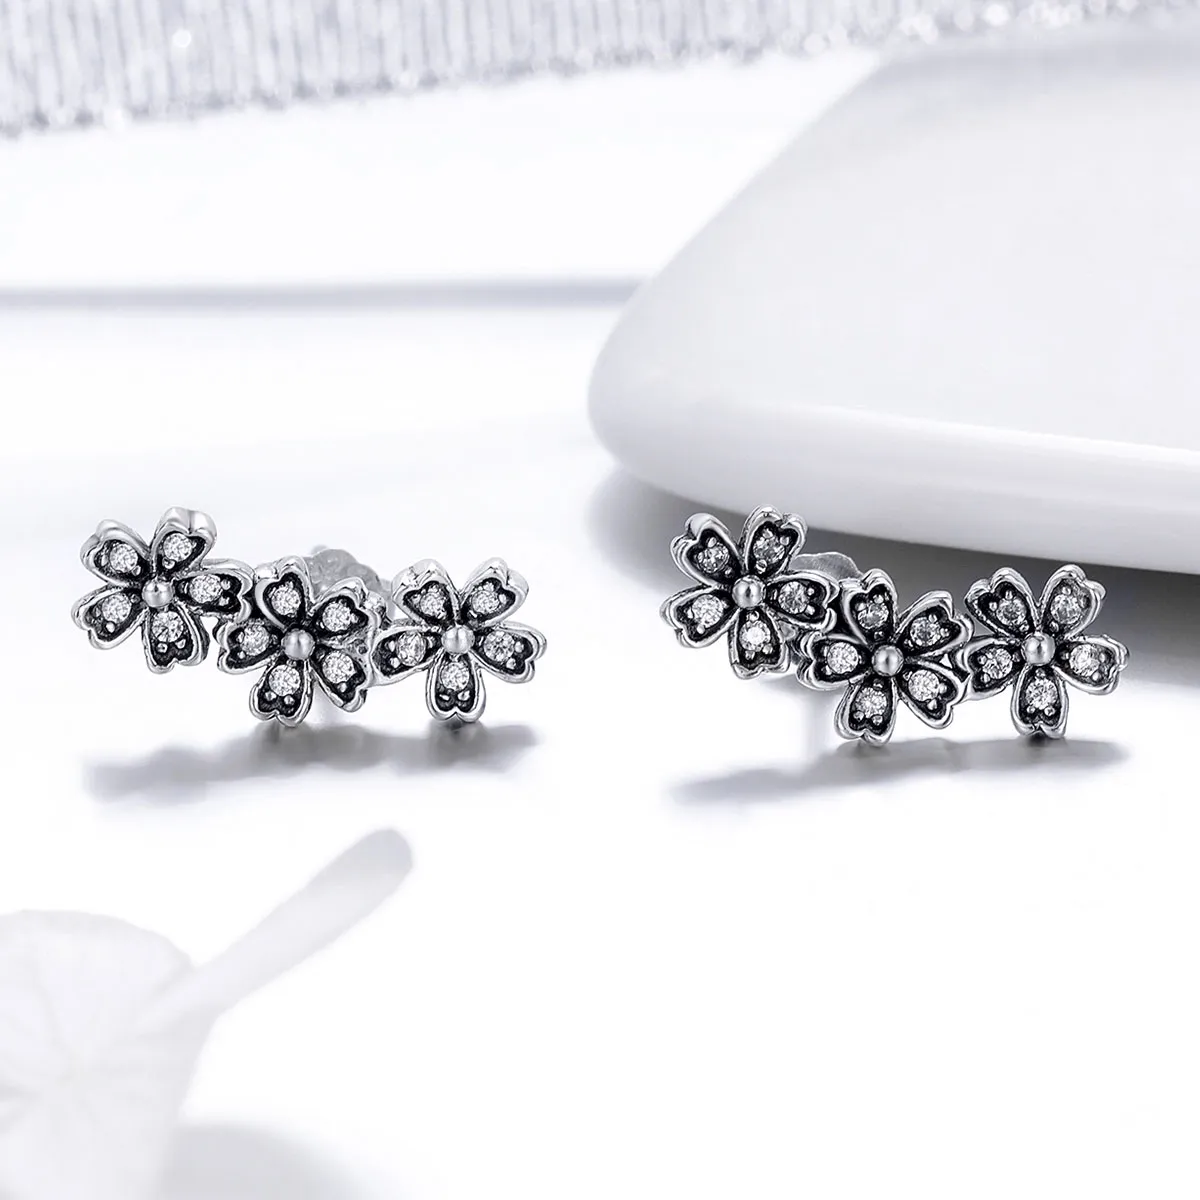 Pandora Style Silver Contracted Daisy Stud Earrings - SCE419